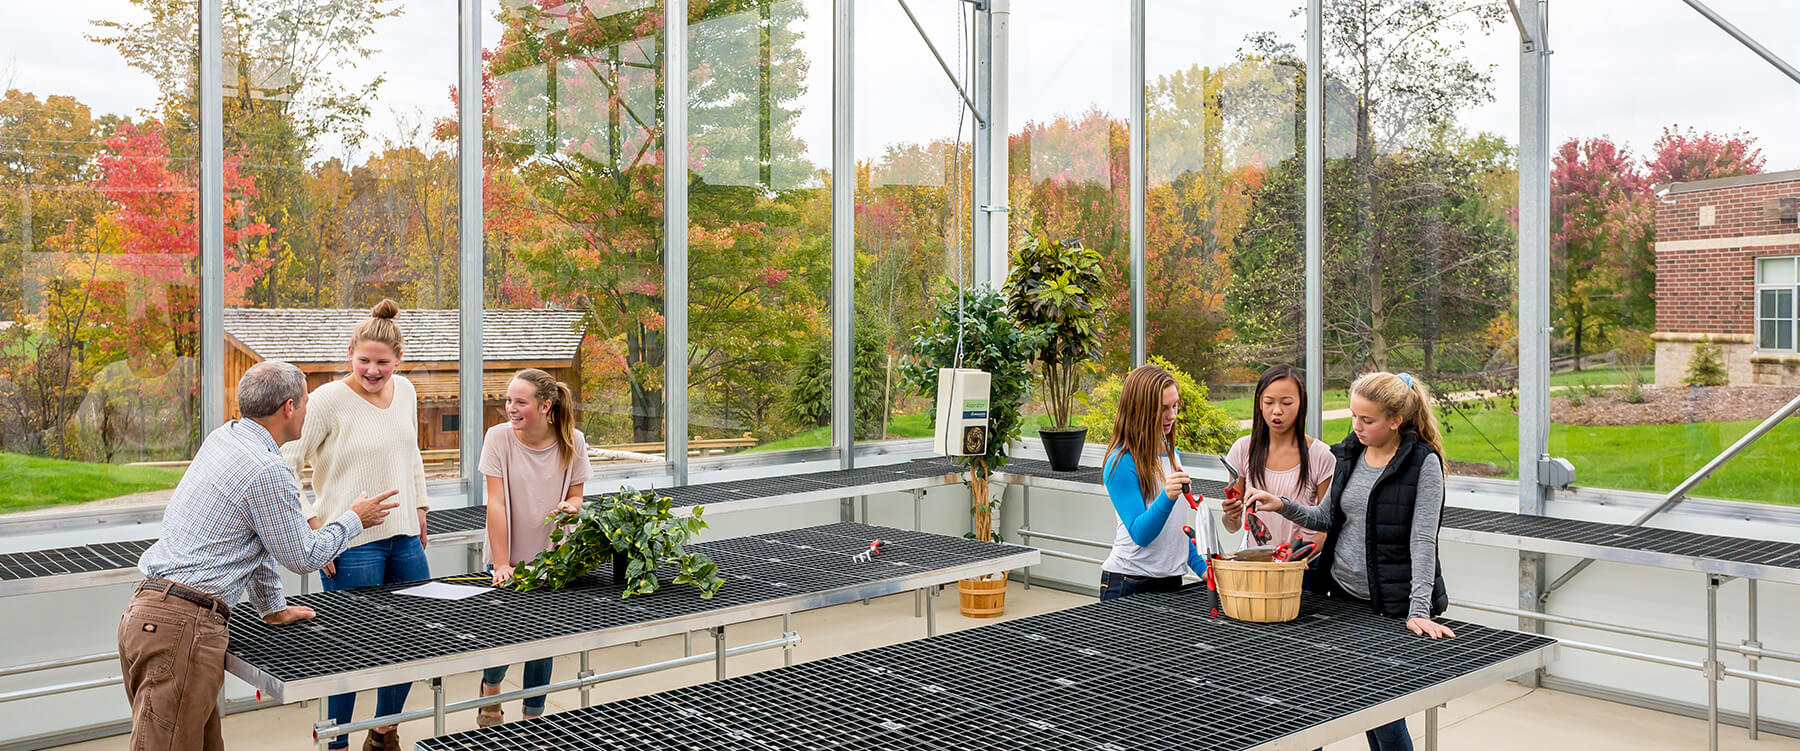 Ada Christian Integrated Outdoor Education greenhouse lesson